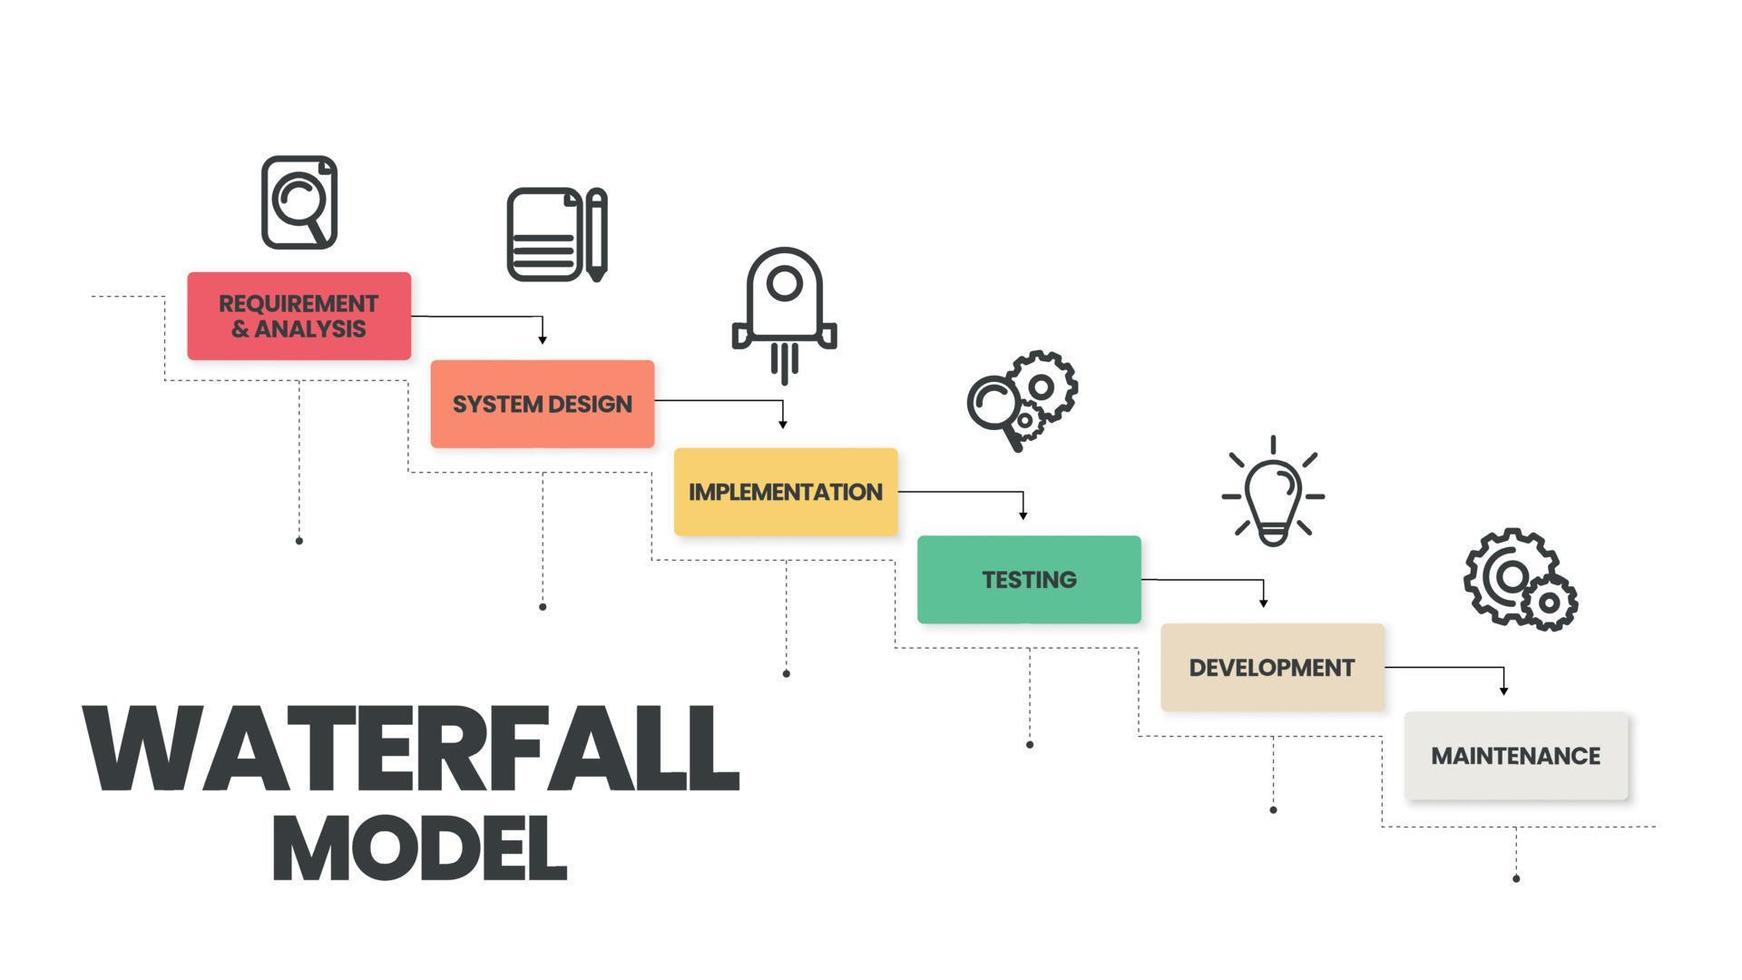 The waterfall model infographic vector is used in software engineering or software development processes. The illustration has 6 steps like Agile methodology or design thinking for application  system